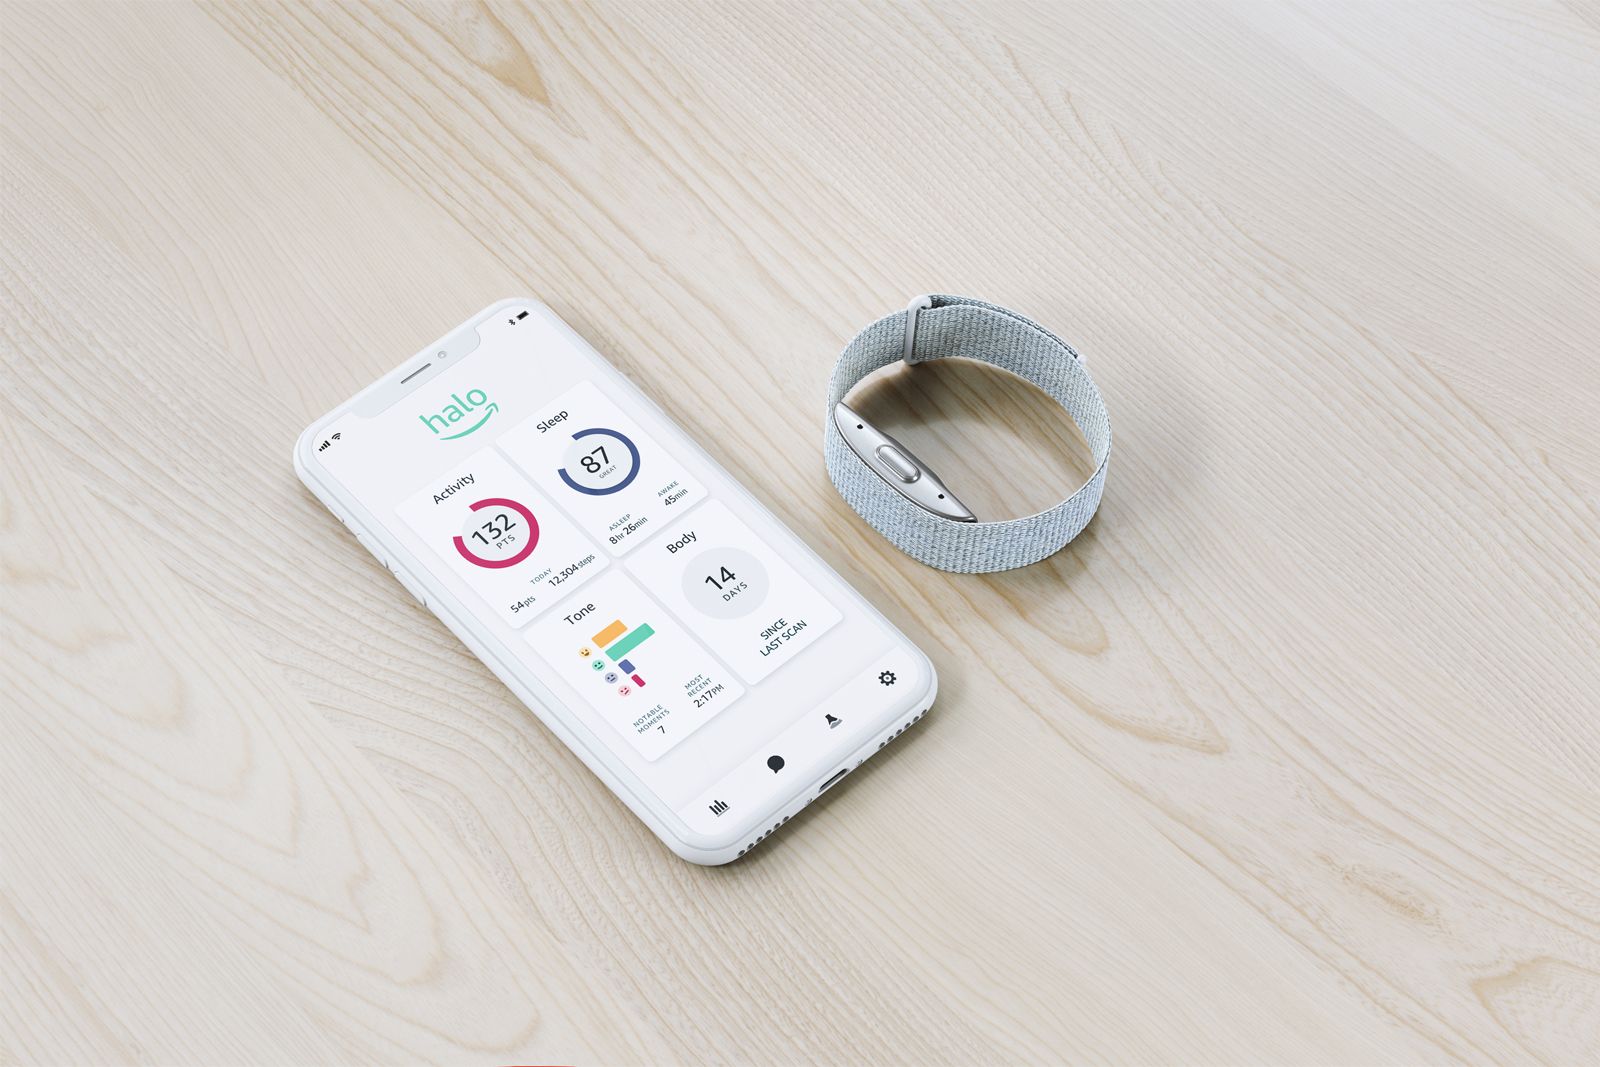 Amazon Halo is a 'mood sensing' fitness band and app photo 1